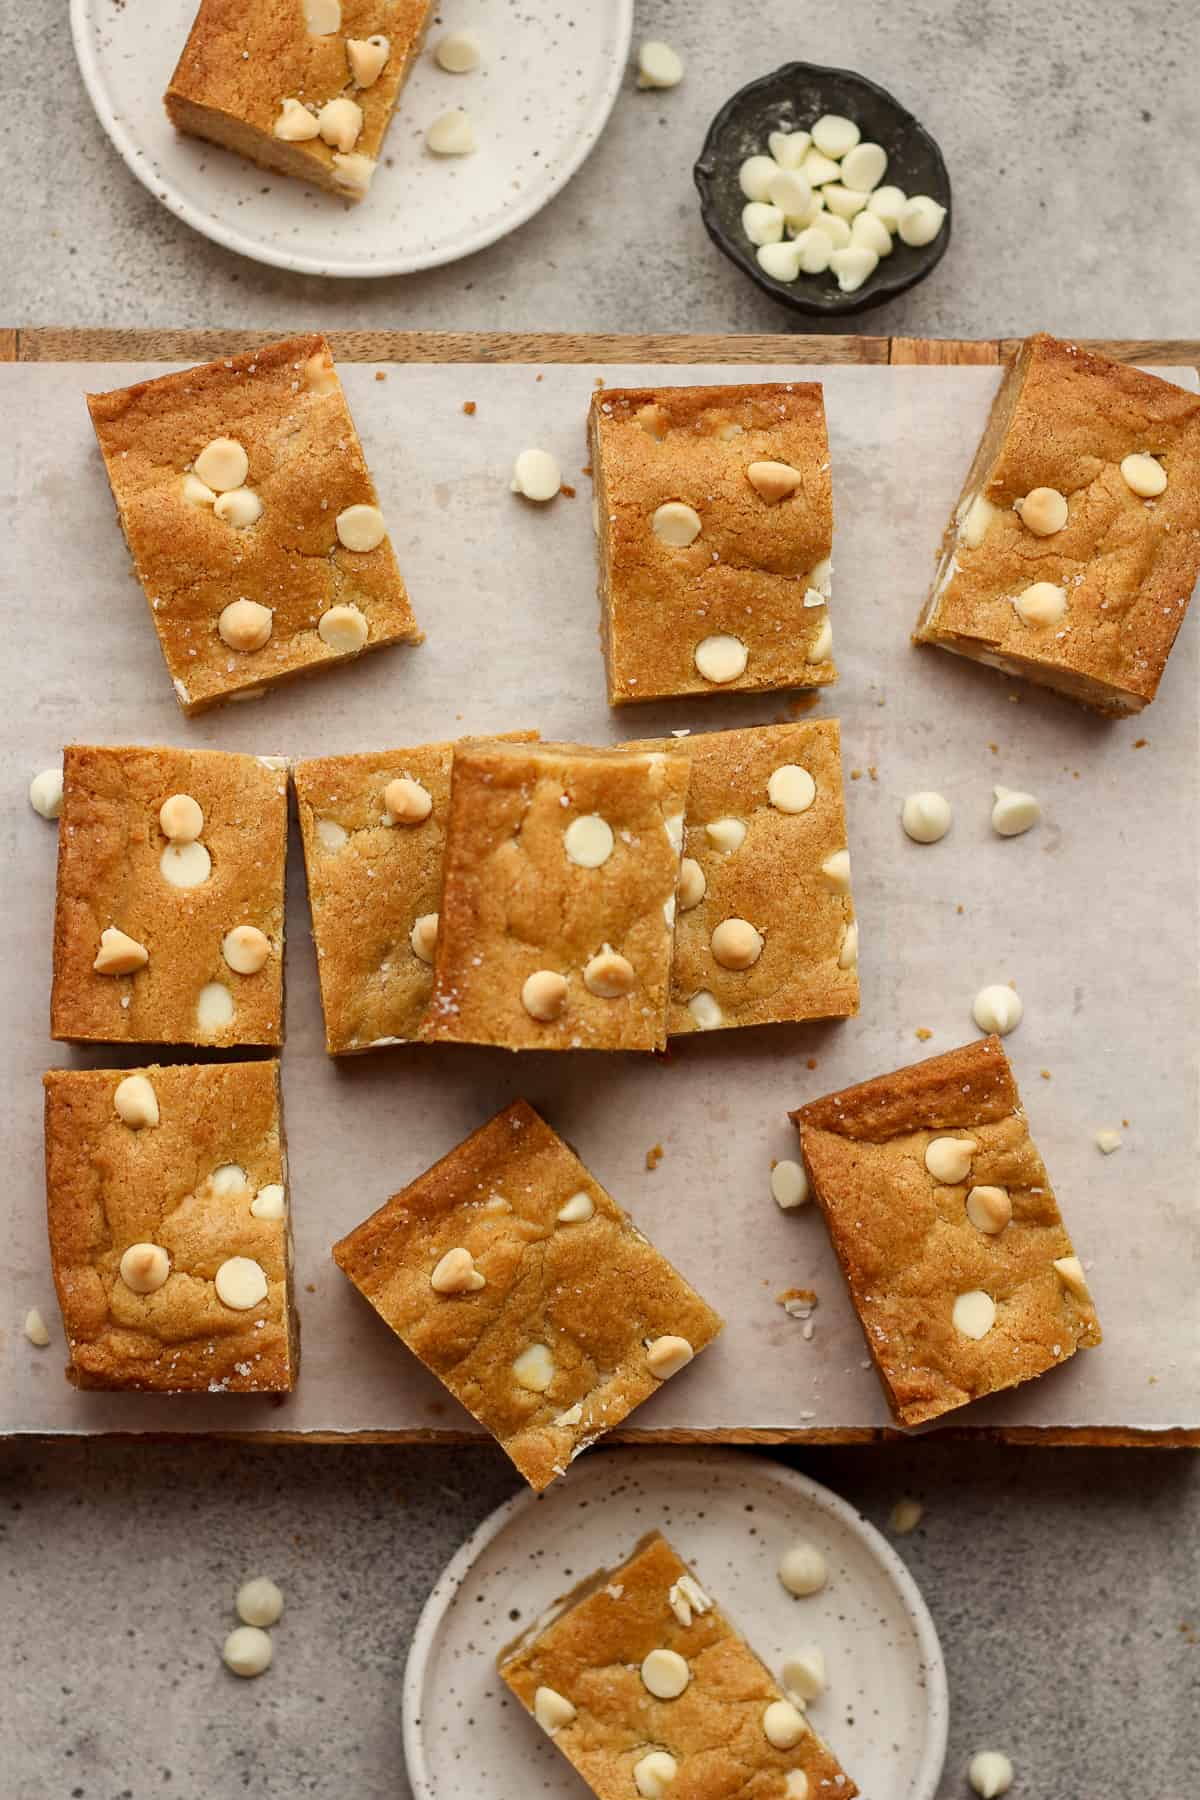 A board with several brown butter blondies, with white chocolate chips.